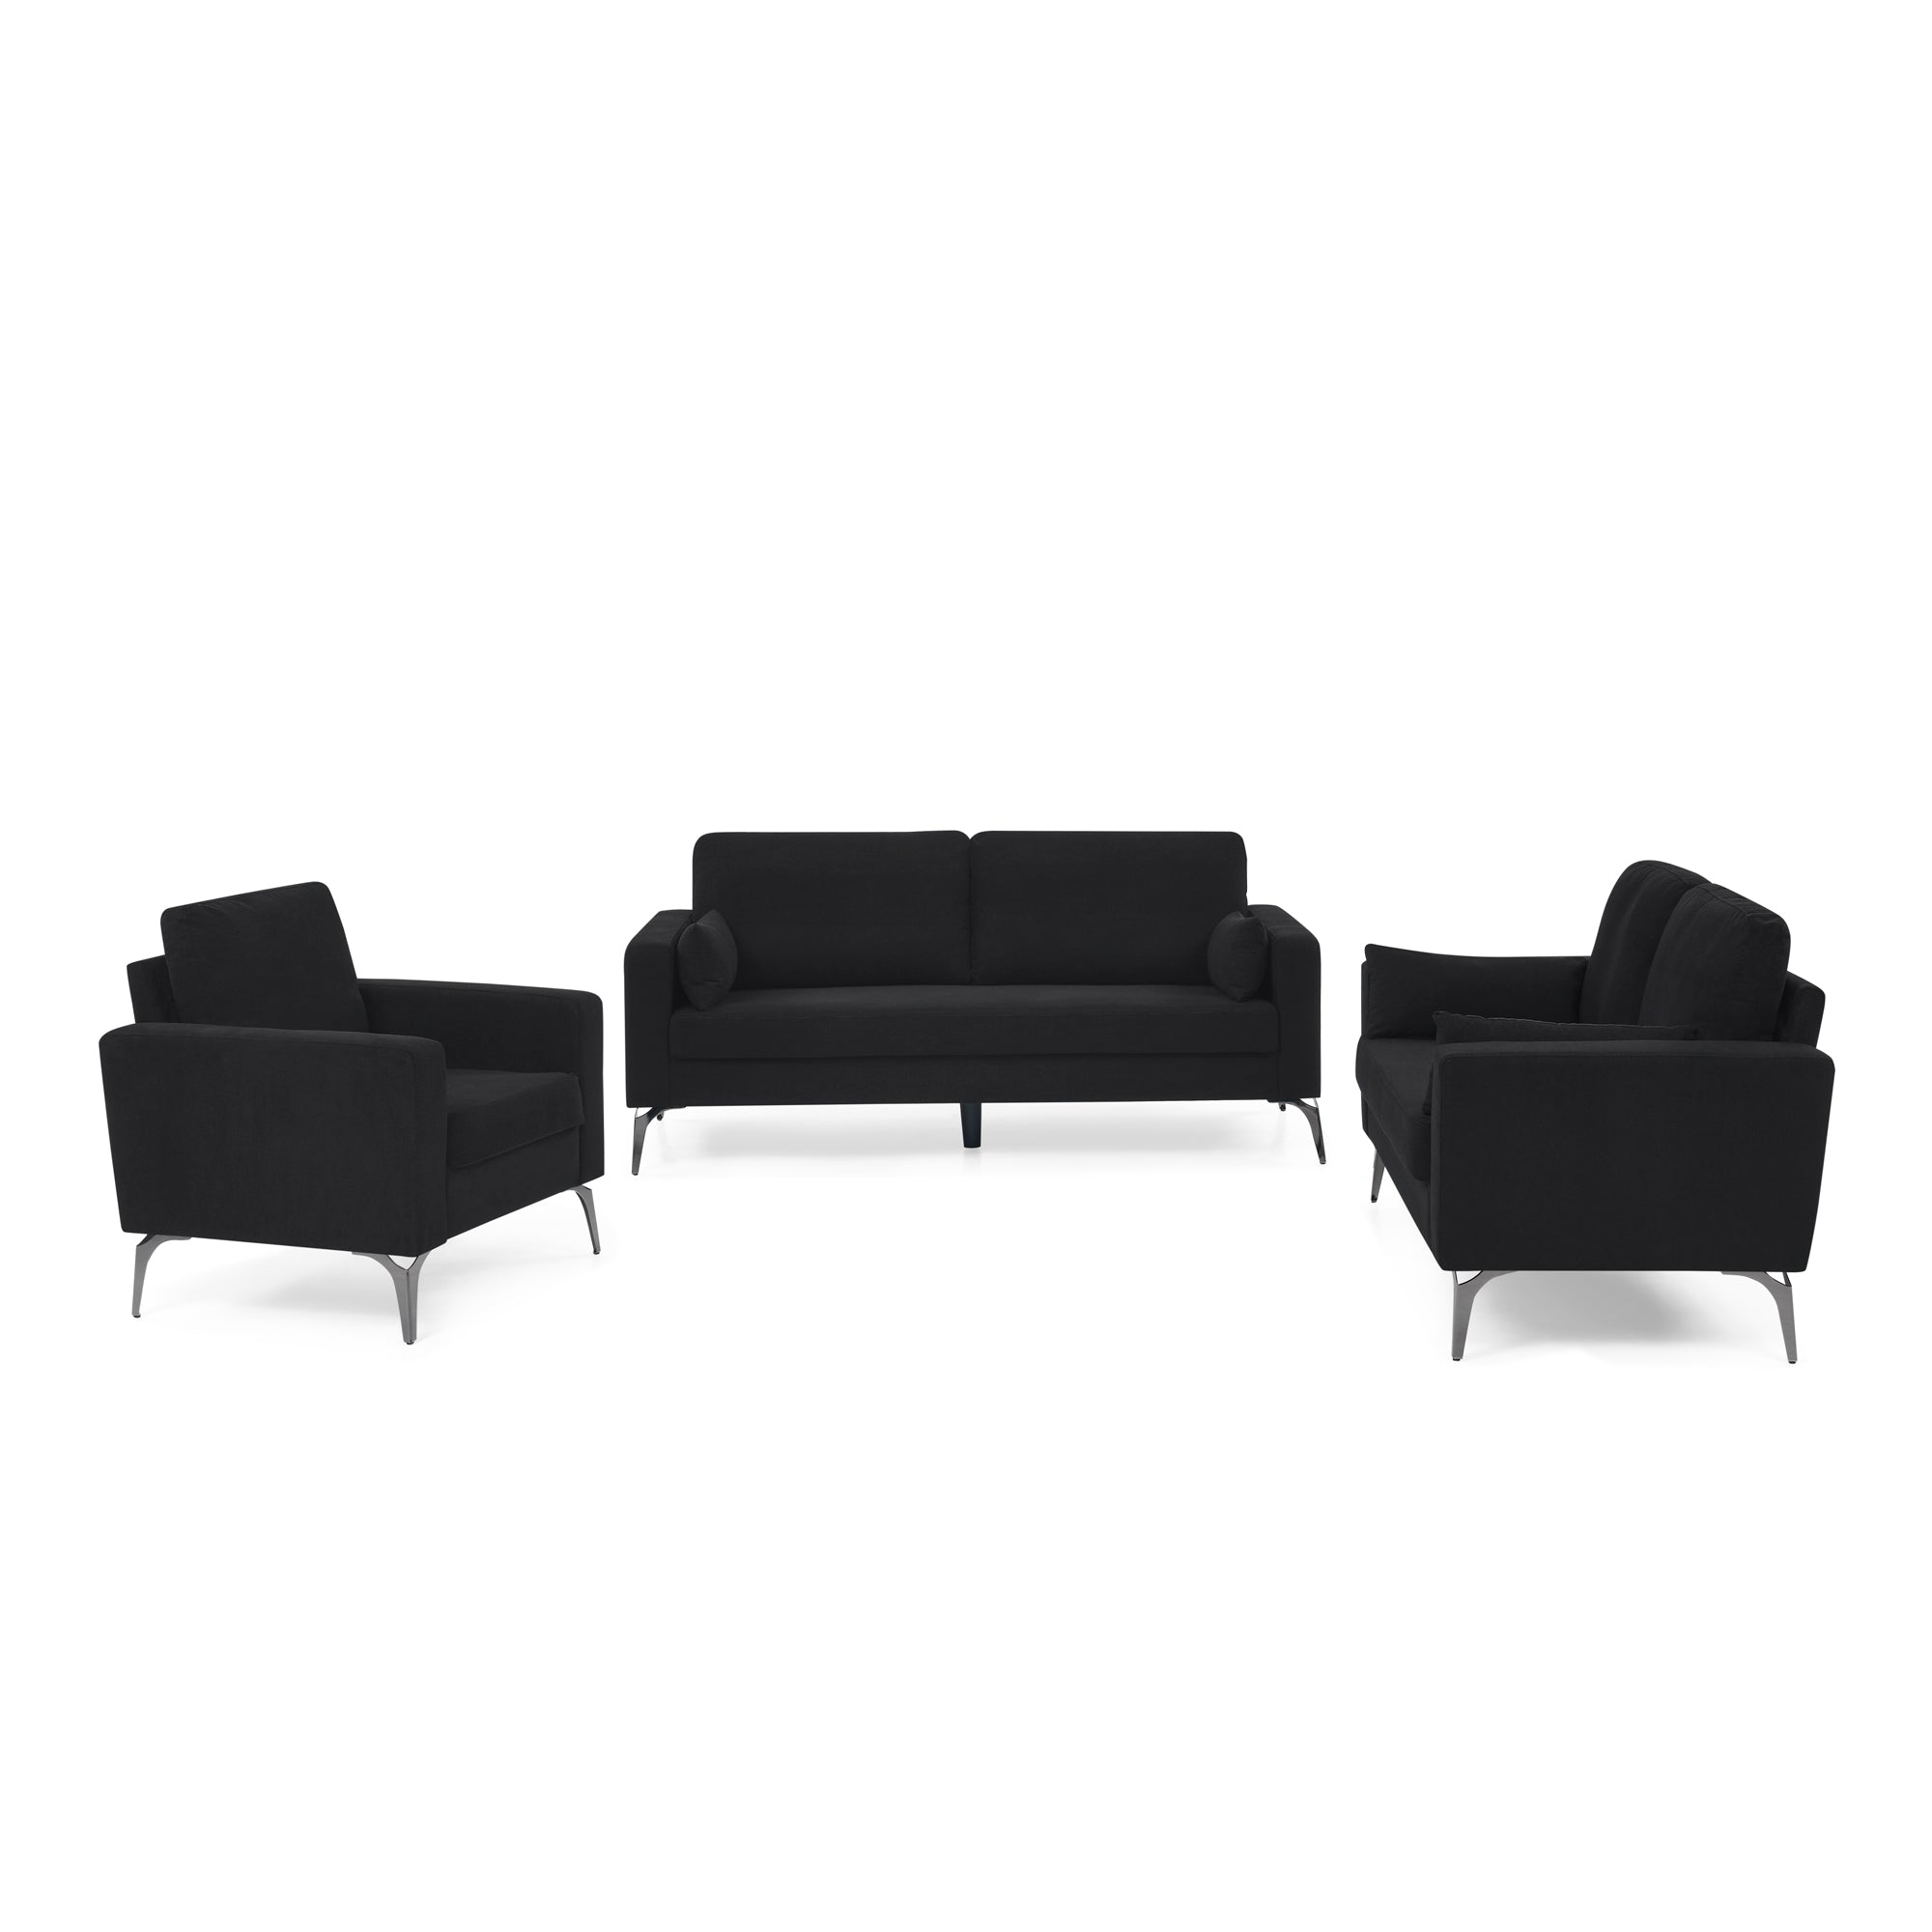 3 Piece Corduroy Sofa Set, including 3-Seater Sofa, Loveseat and Sofa Chair